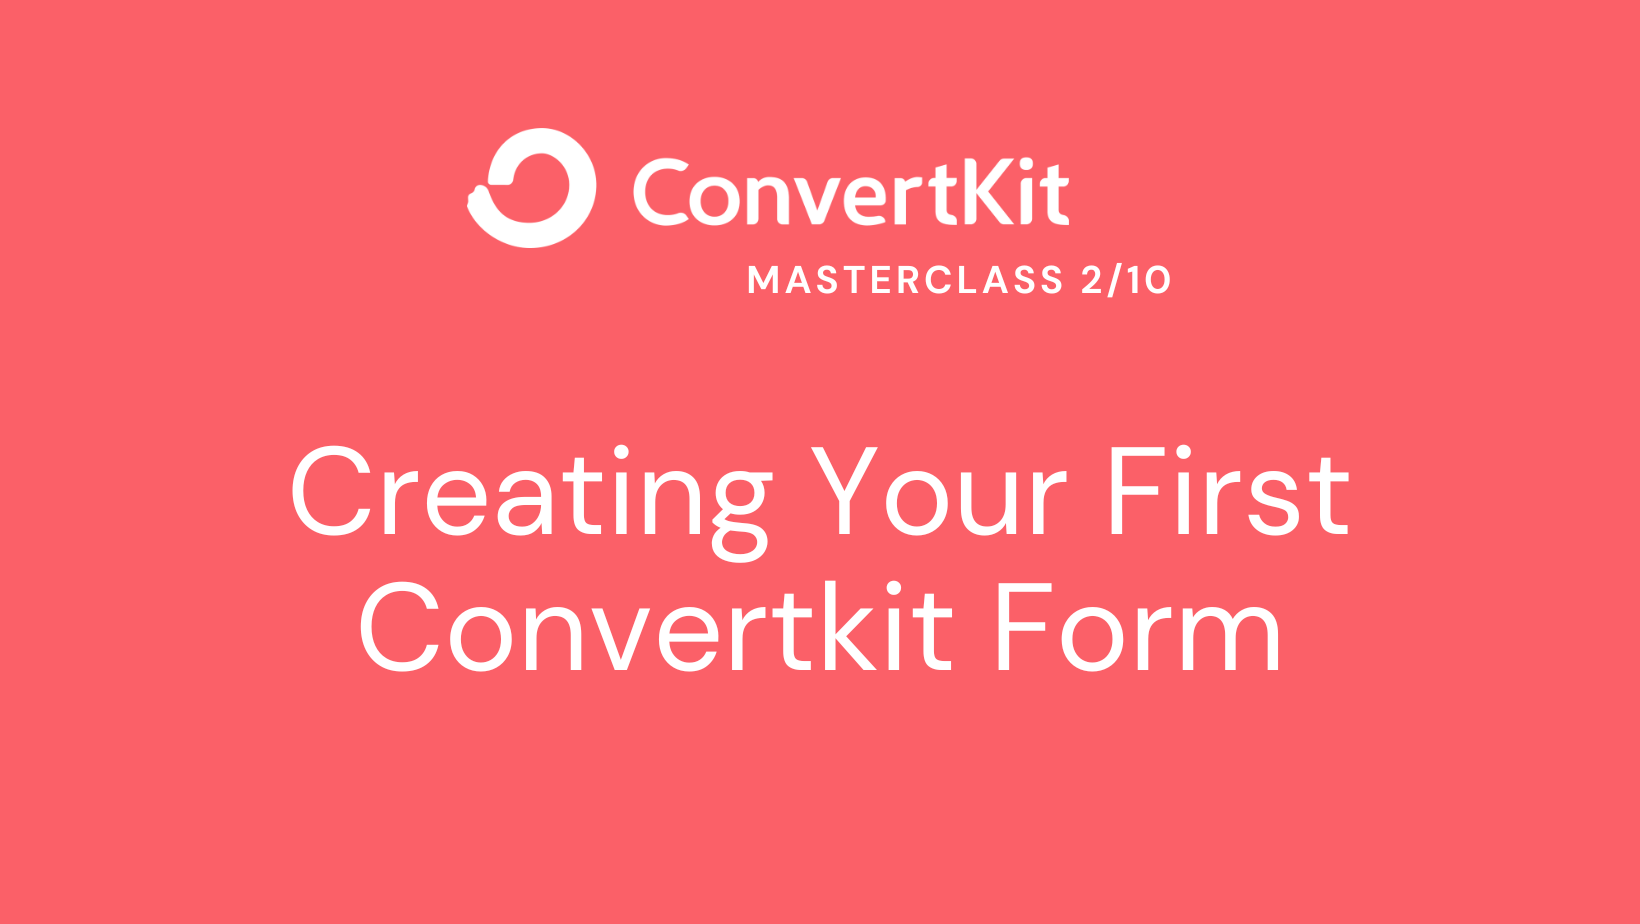 Creating Your First Convertkit Form: Step-by-Step Instructions